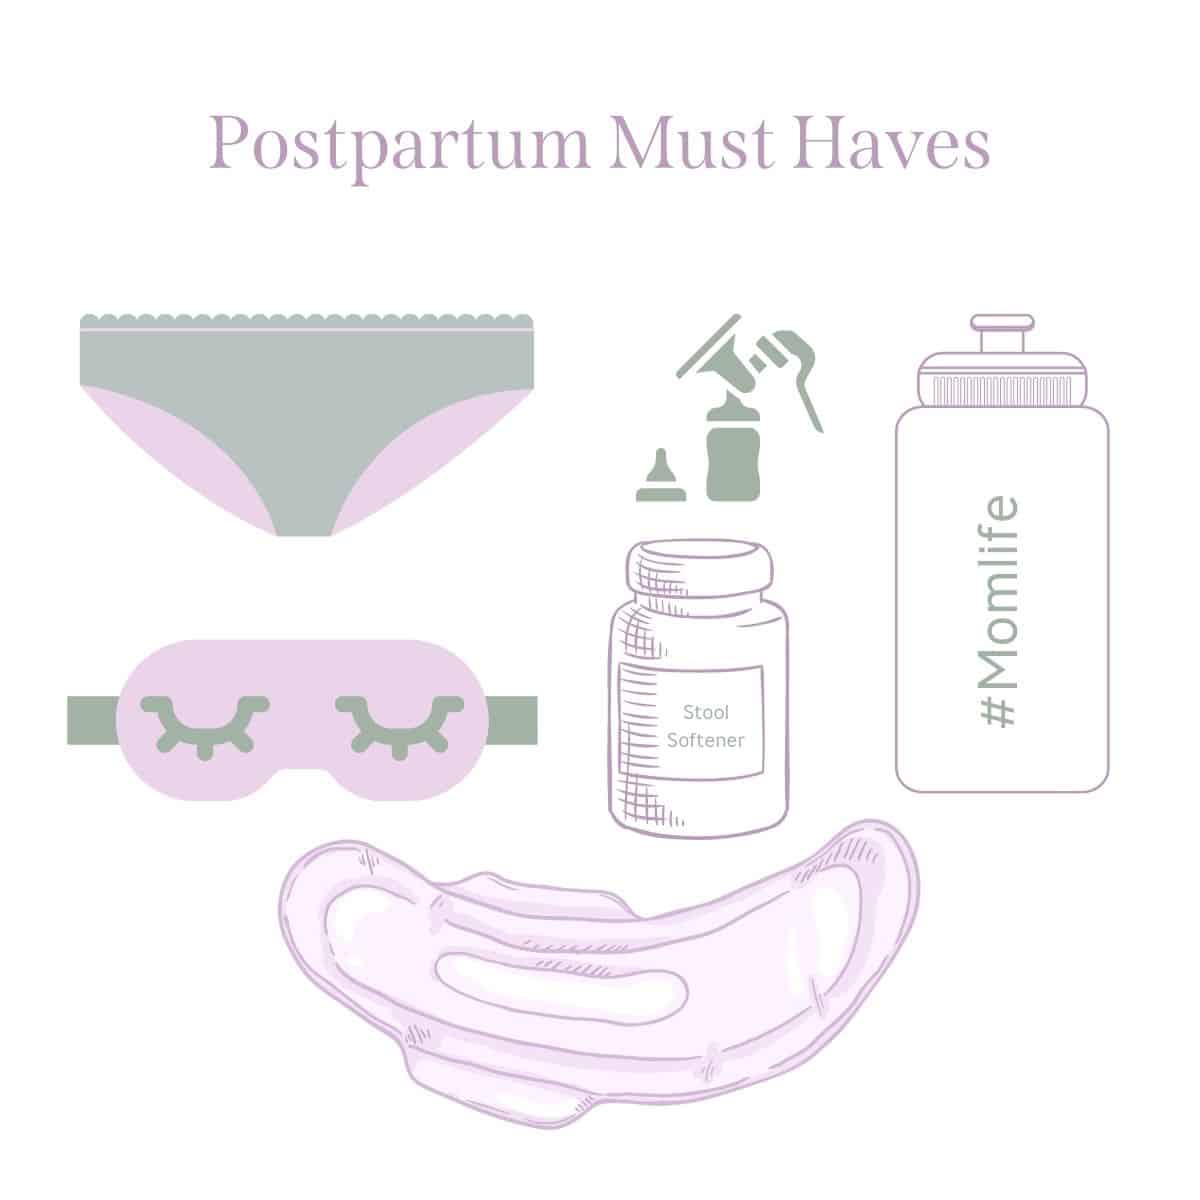 square graphic with a white background that says postpartum must haves at the top and then shows photos of postpartum essentials like maxi pads, stool softener, and more